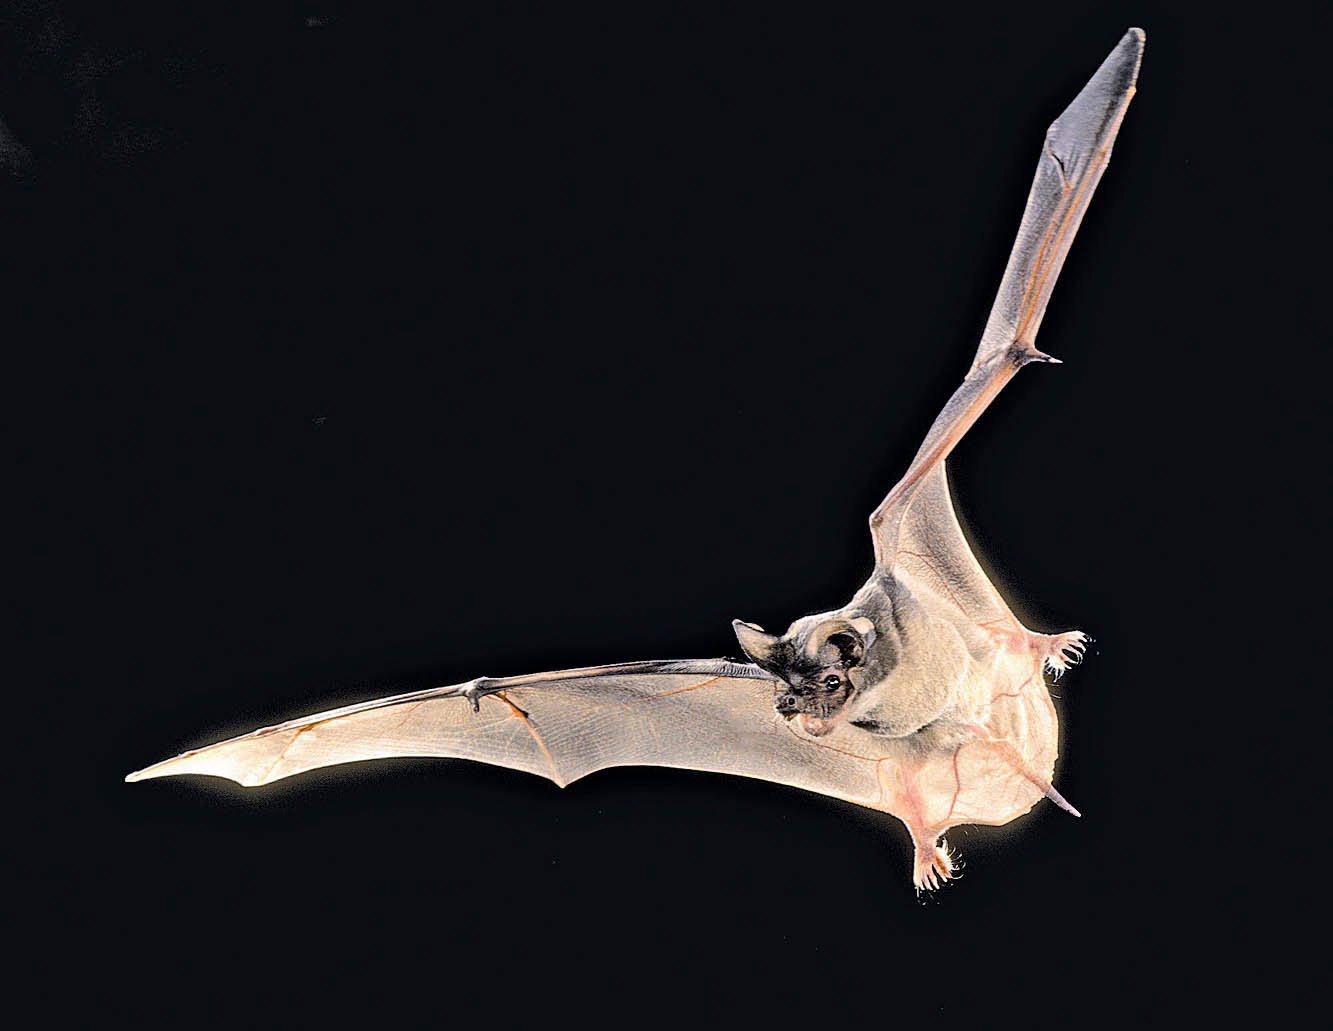 Scientists have discovered a virus closely related to SARS in bats in China that can infect human cells.